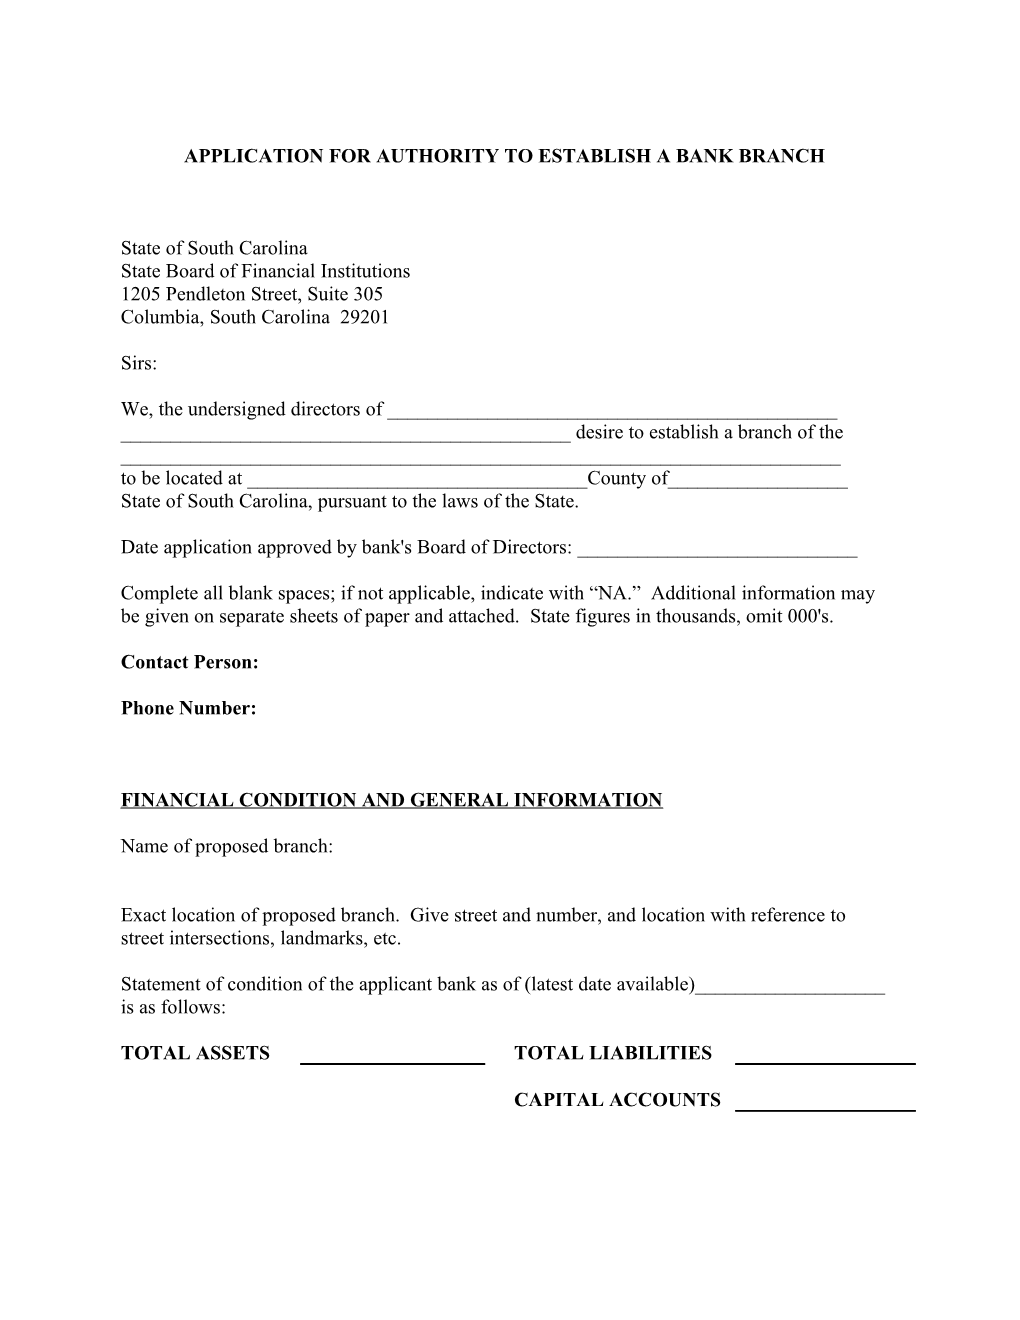 Application for Authority to Establish a Bank Branch